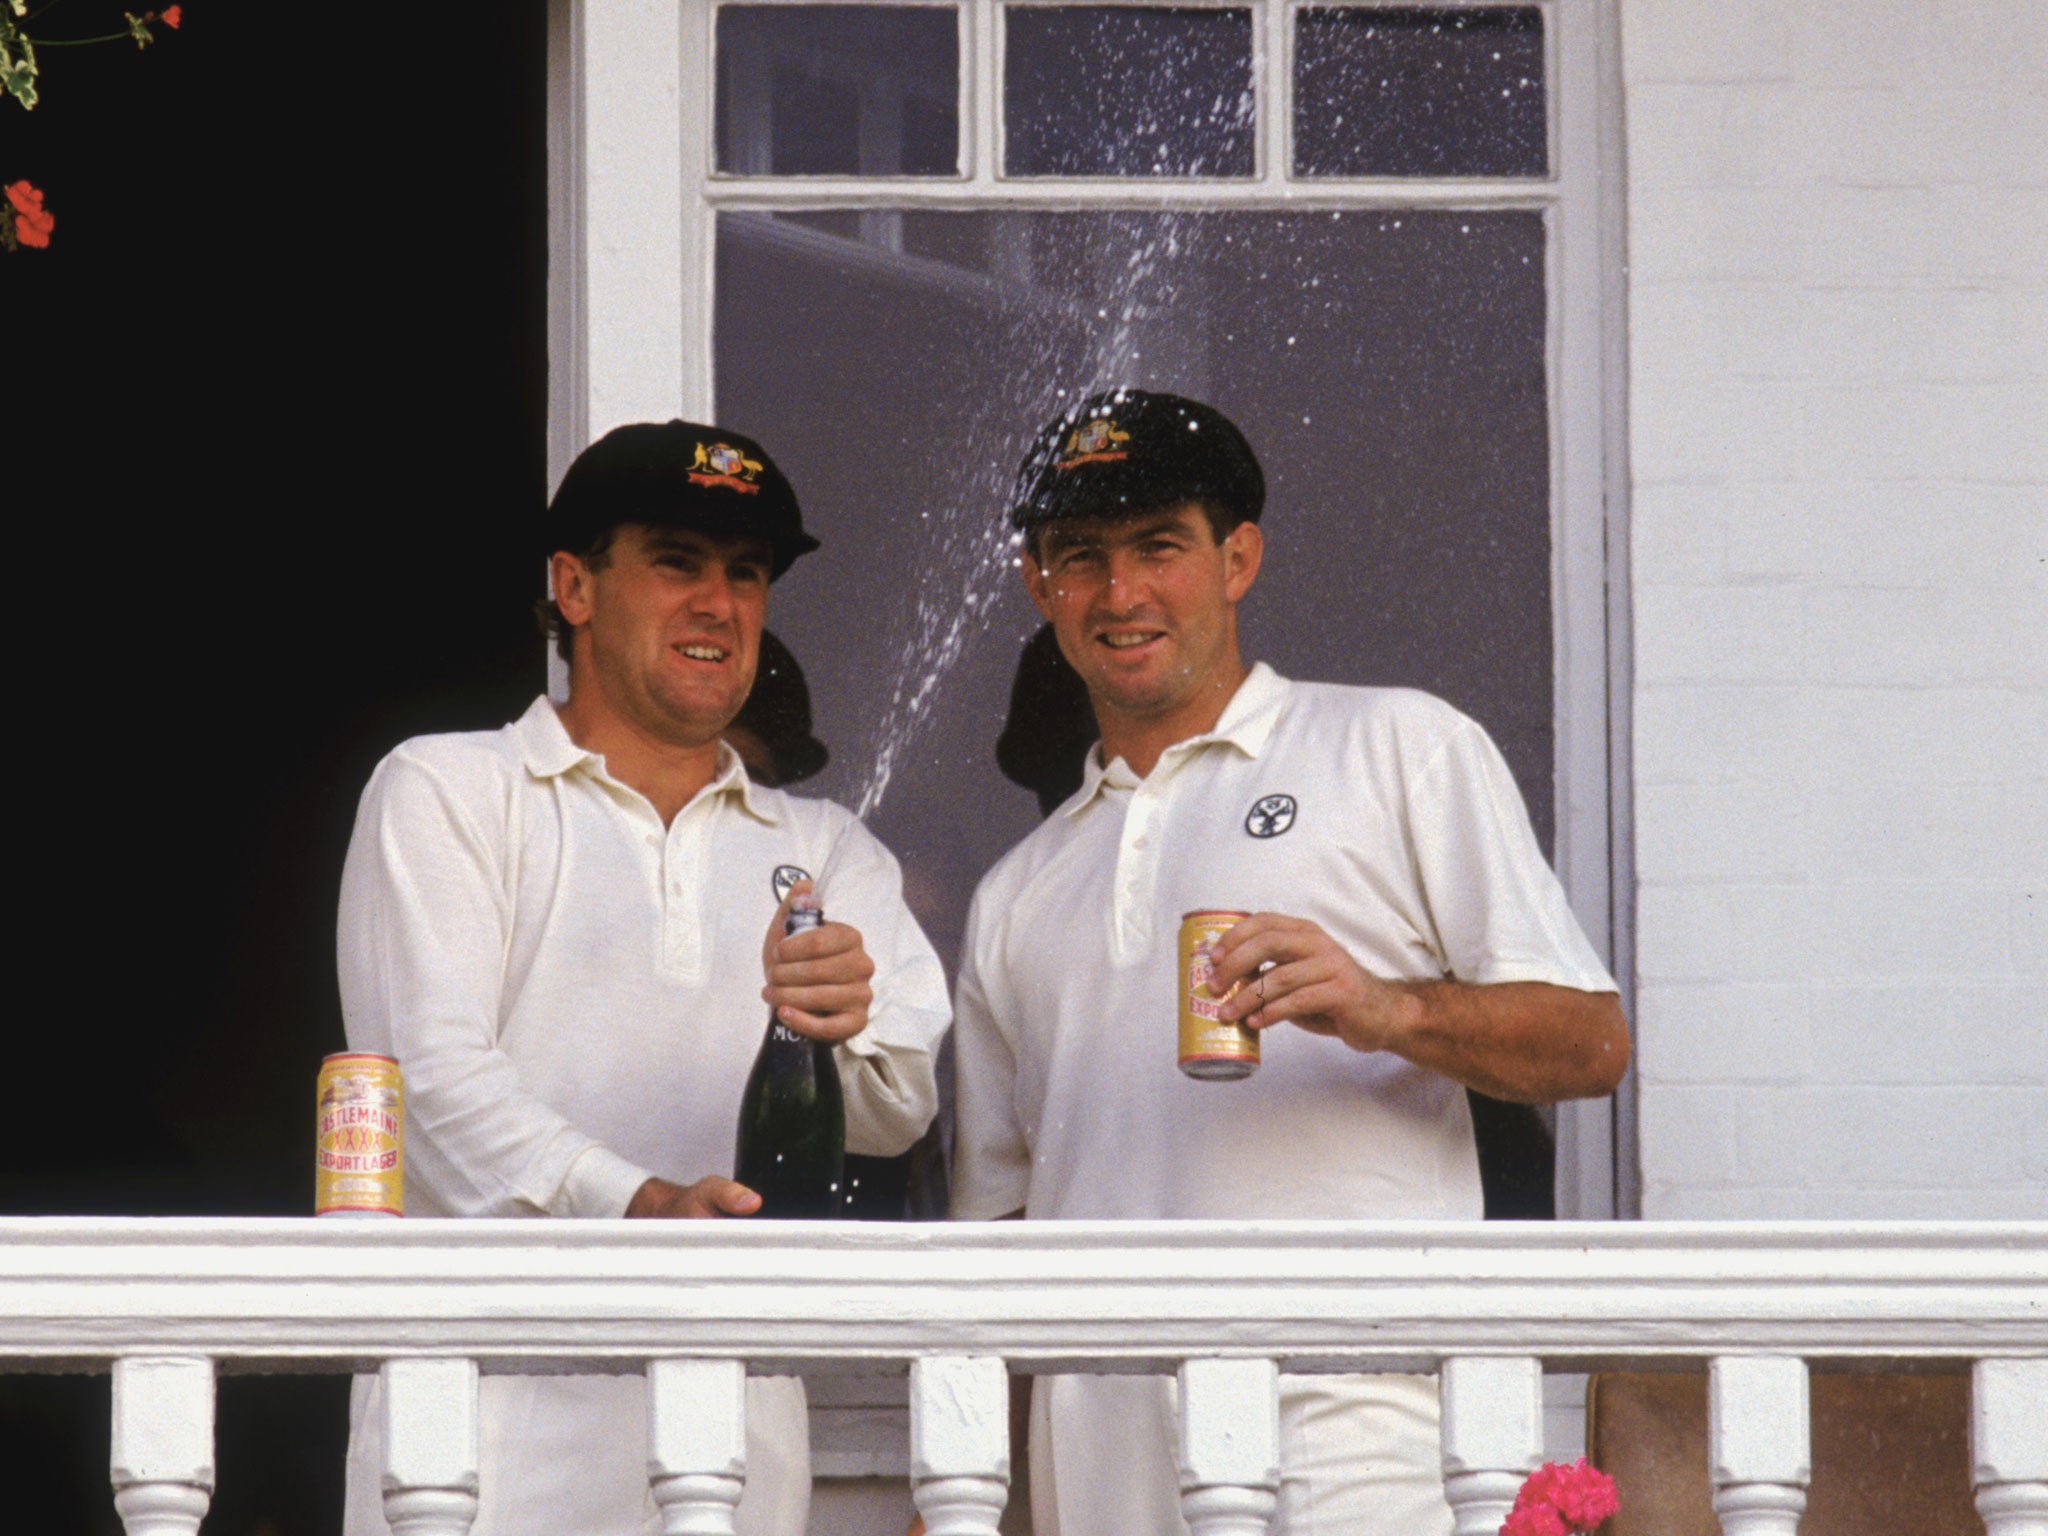 Celebrate: Mark Taylor and Geoff Marsh hail their ’89 Ashes stand of 329